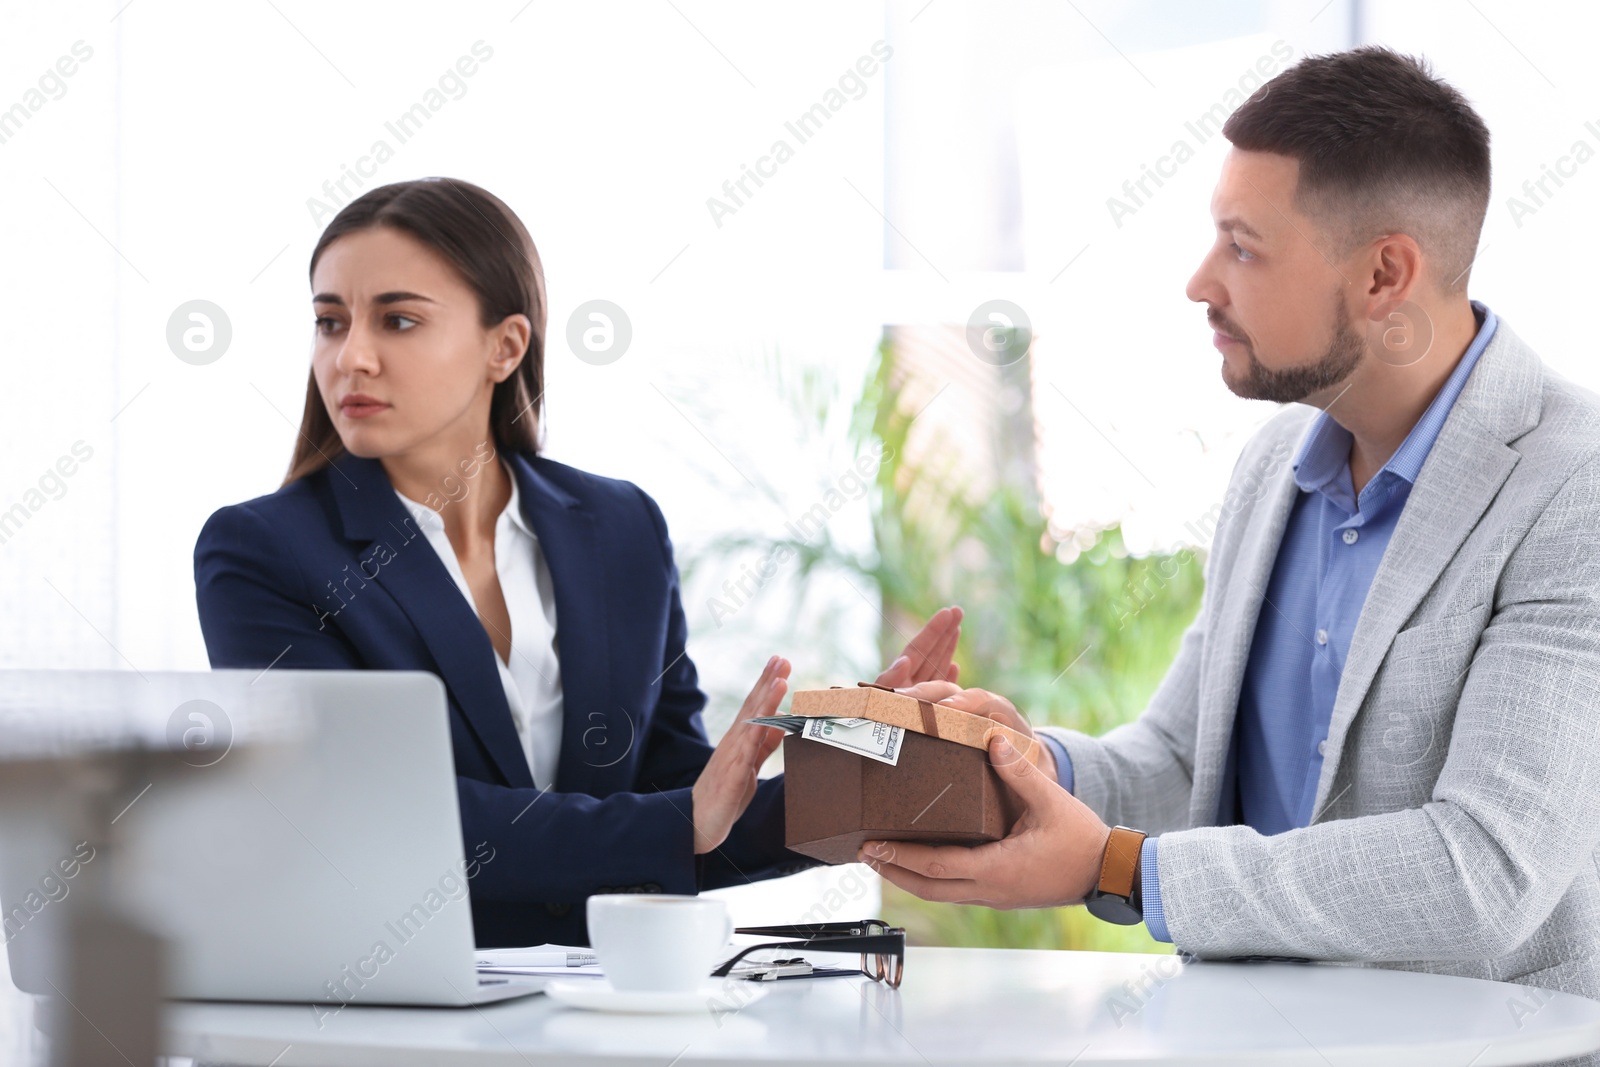 Photo of Businesswoman refusing to take bribe at table indoors